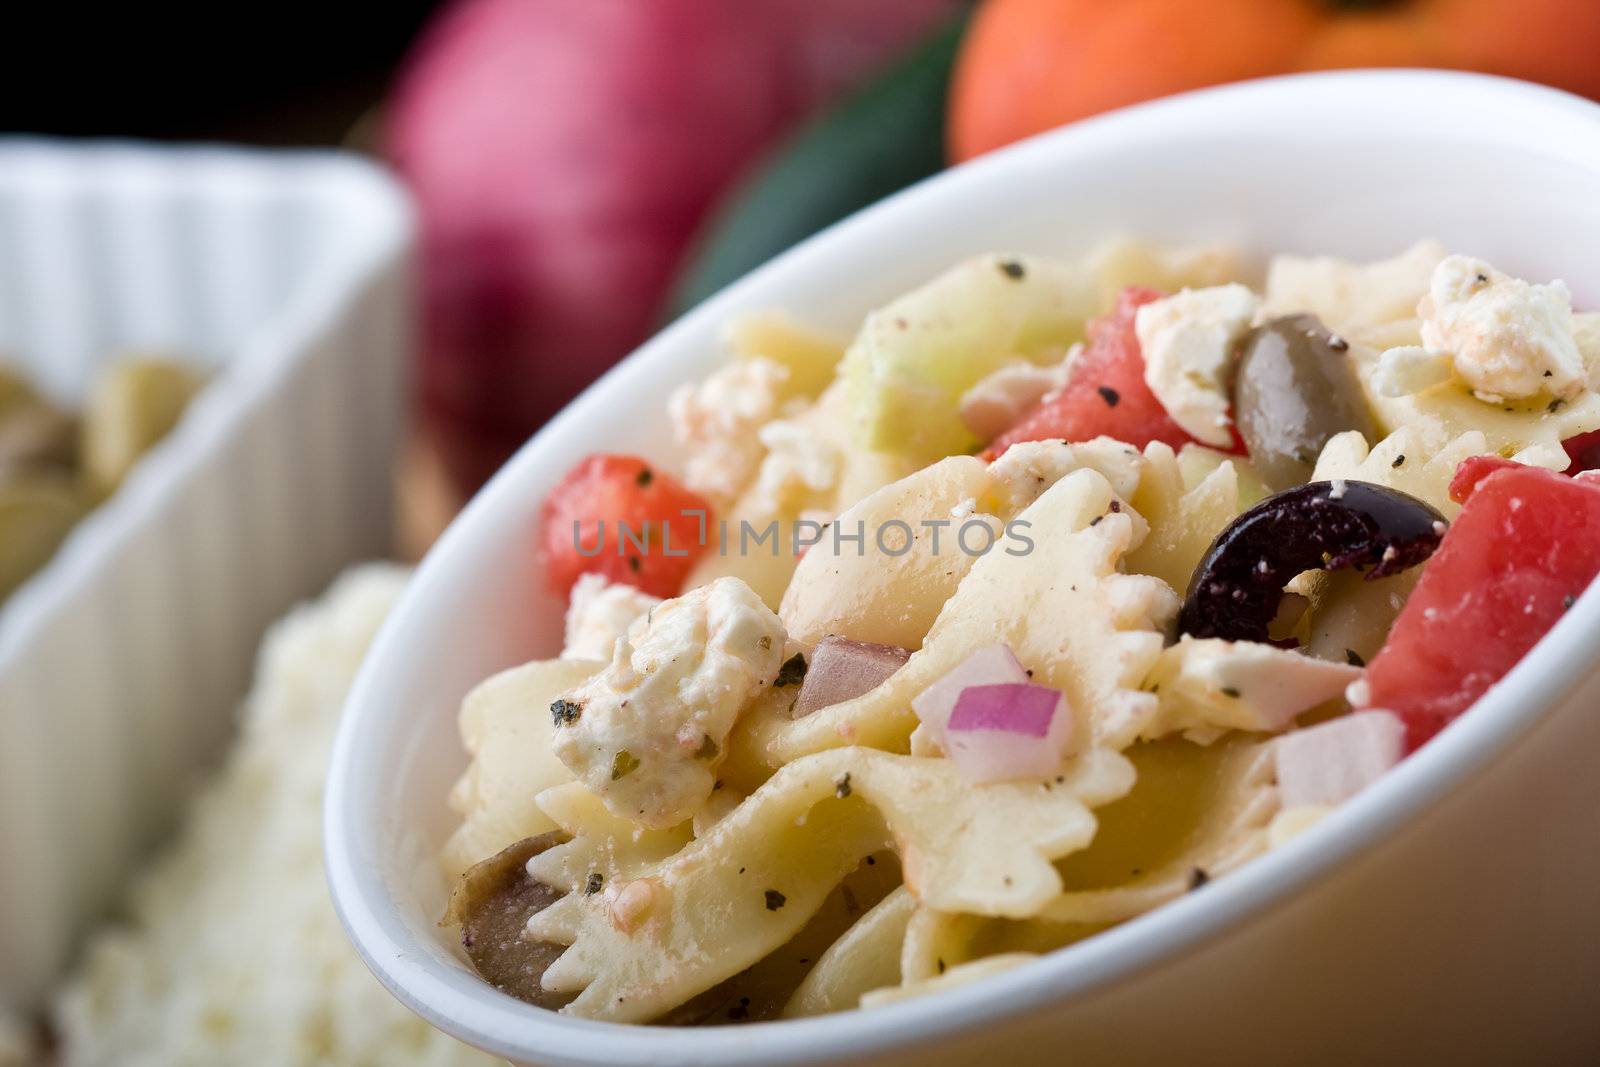 a fresh greek bow-tie pasta salad served cold